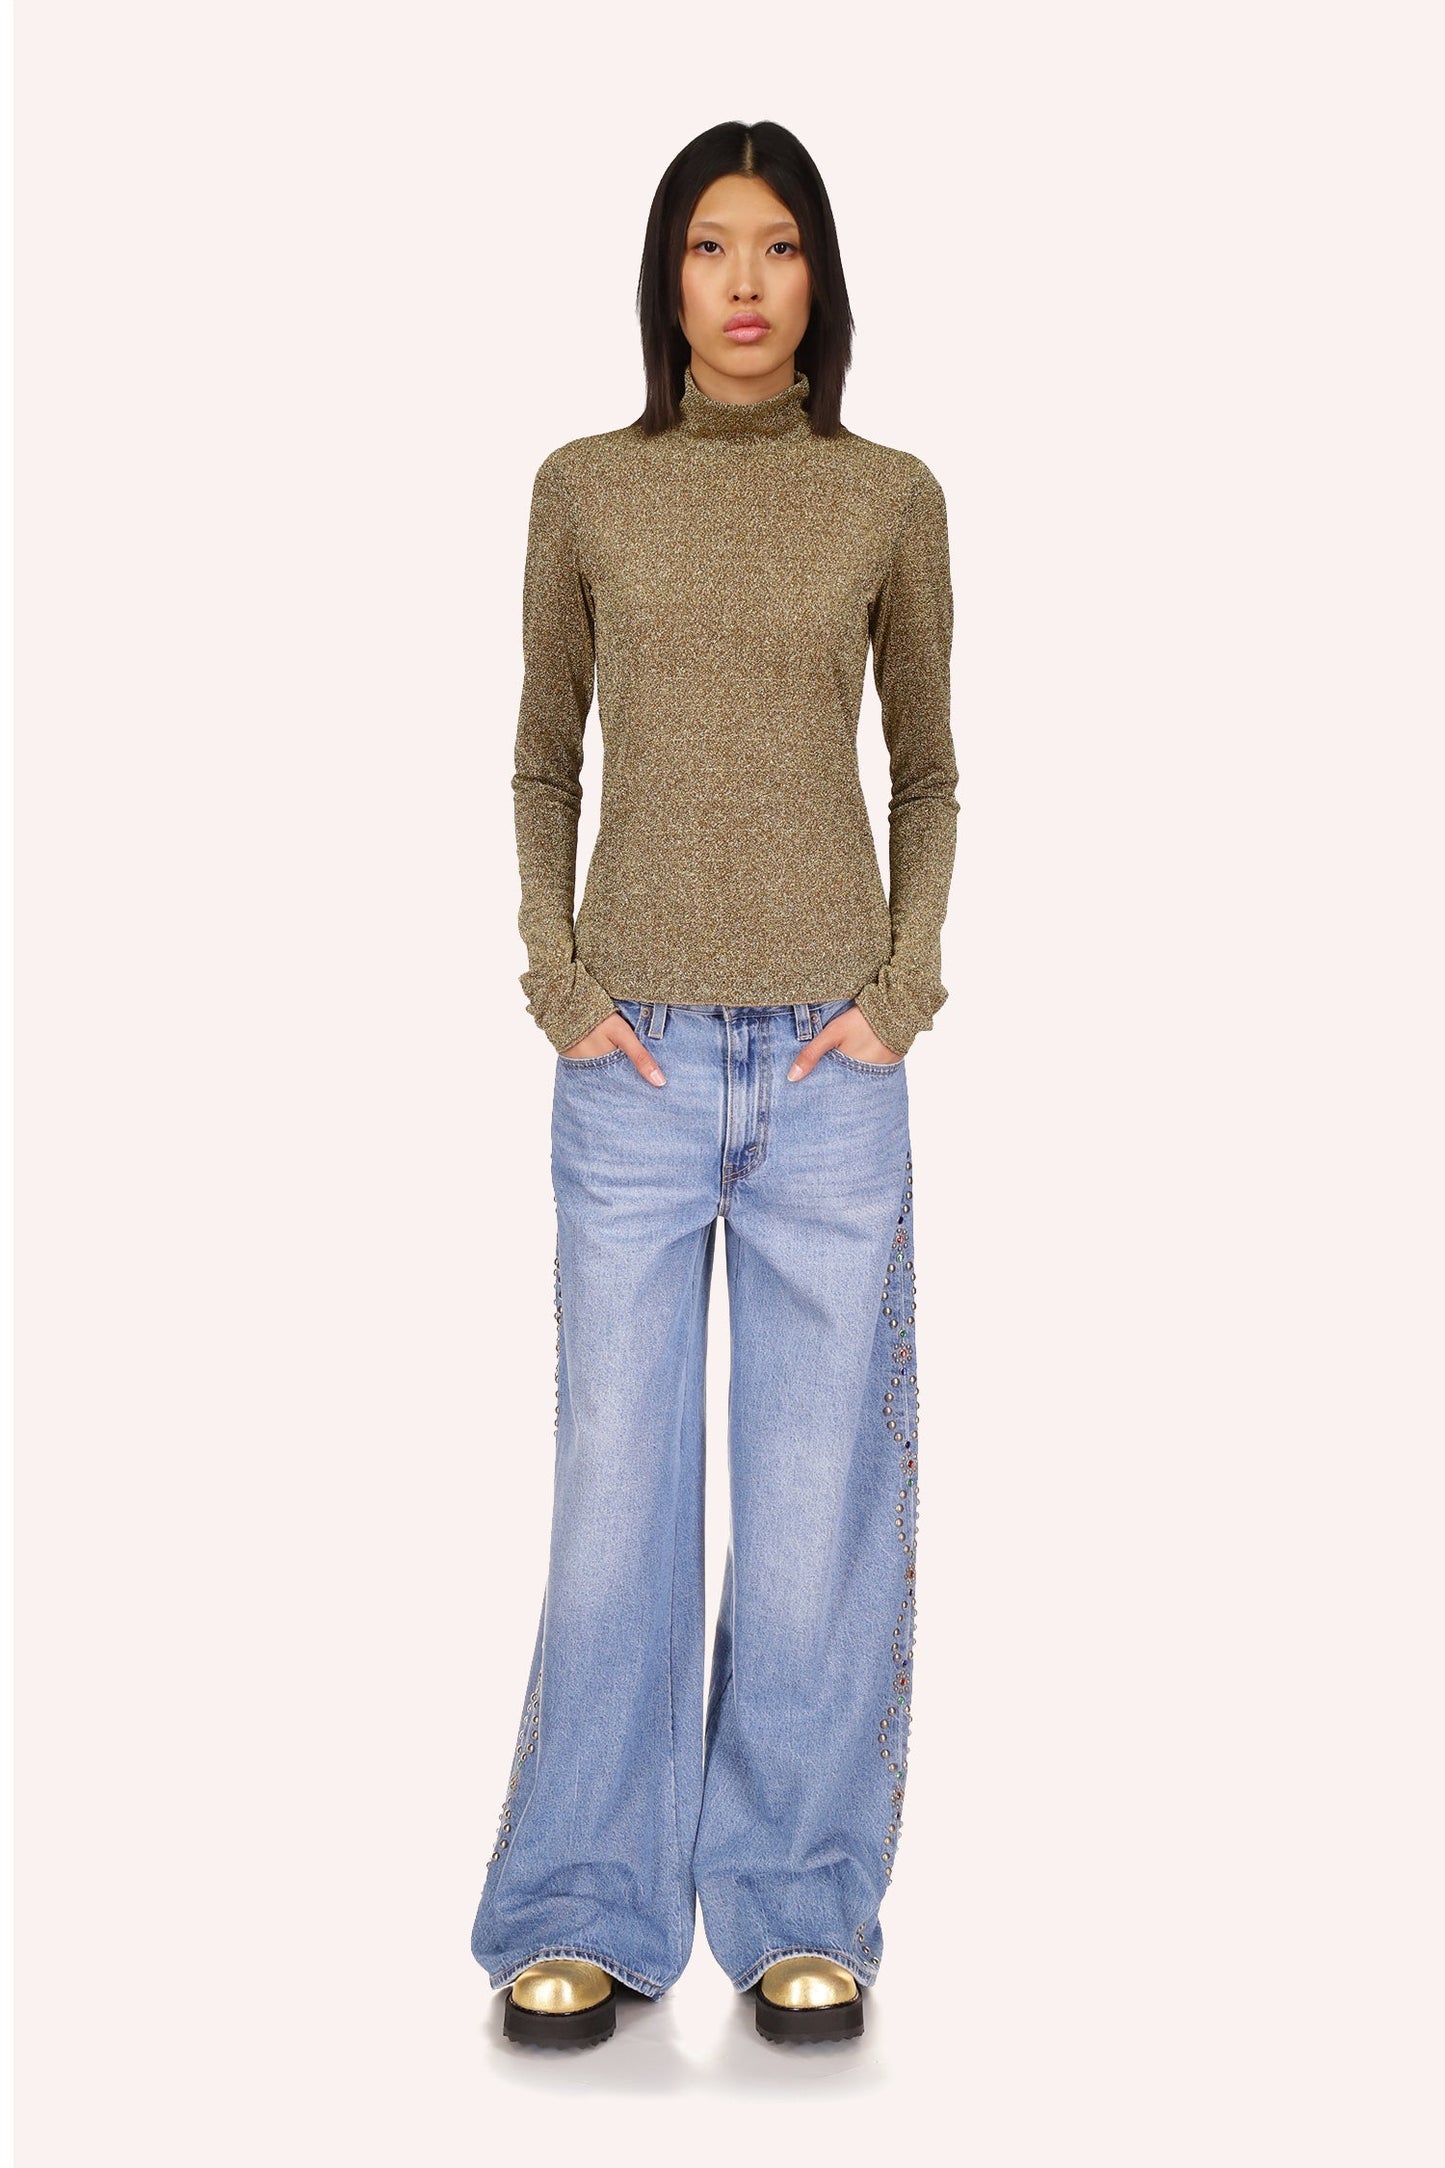 Sparkling gold color and turtleneck, features very long sleeves that can be worn over the hands